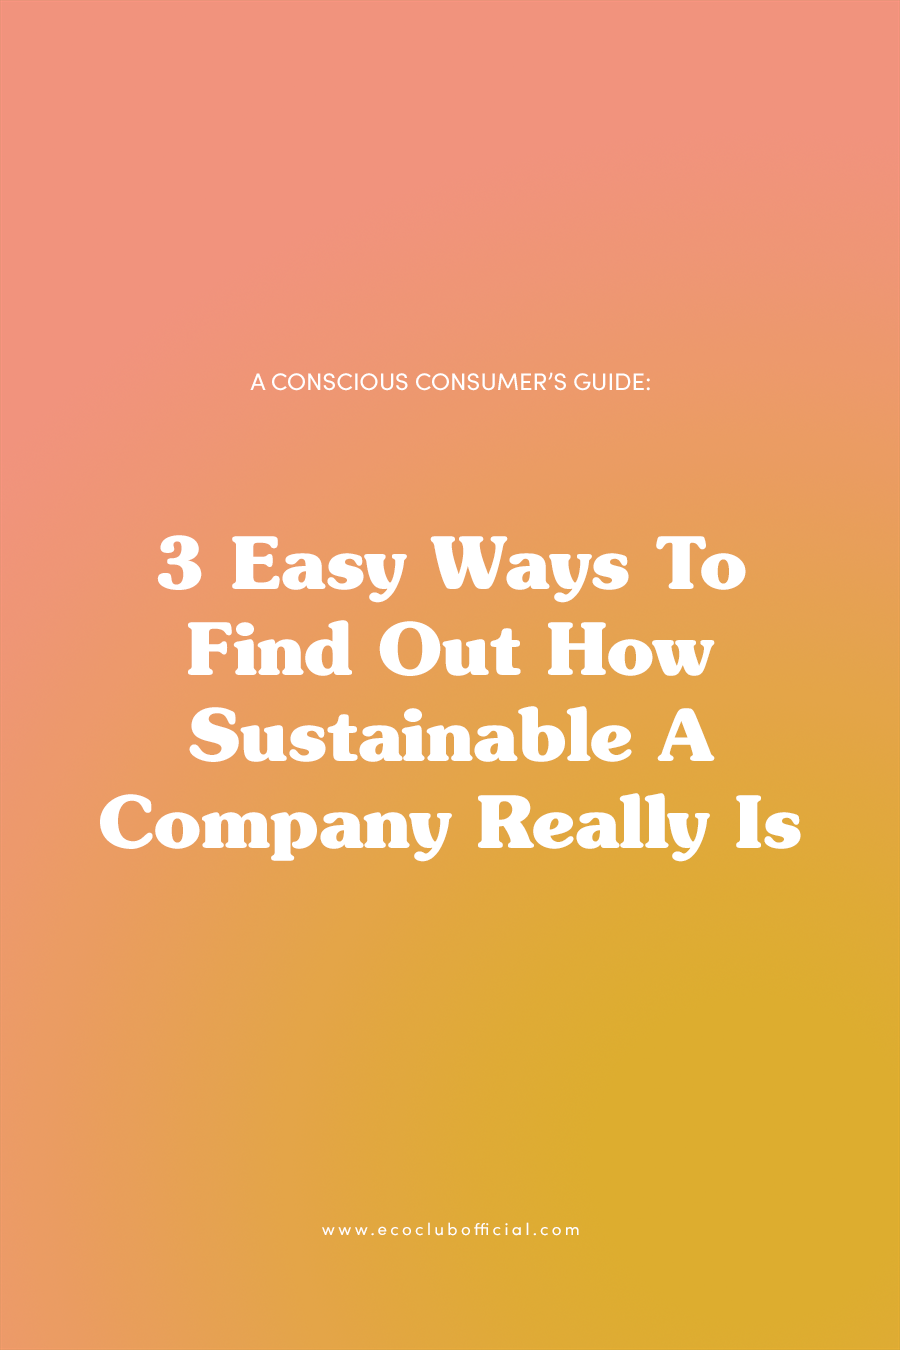 How to find out how sustainable a company really is via eco club